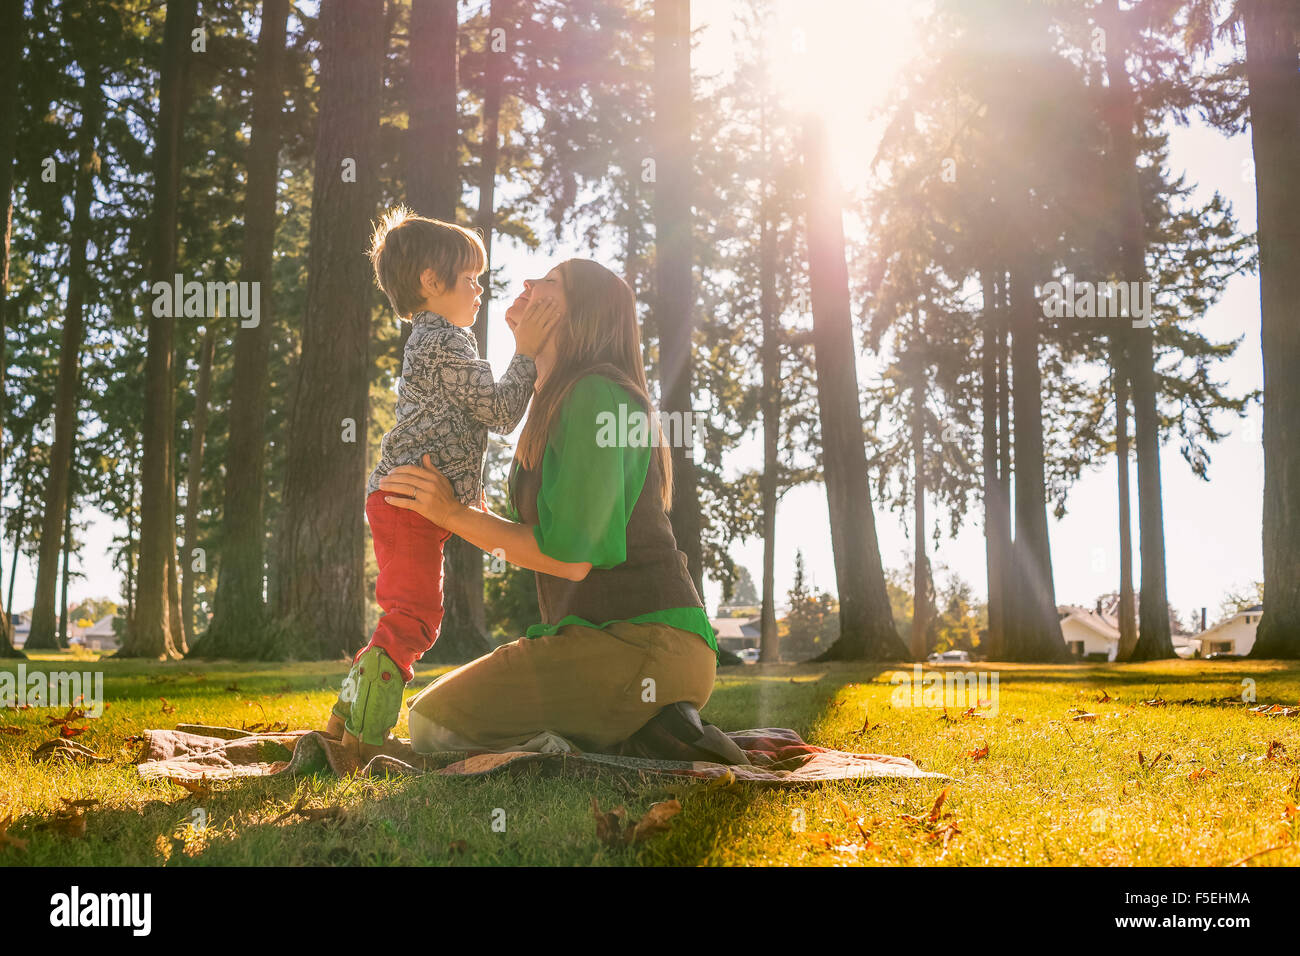 Mother and son touching with smiling faces Stock Photo